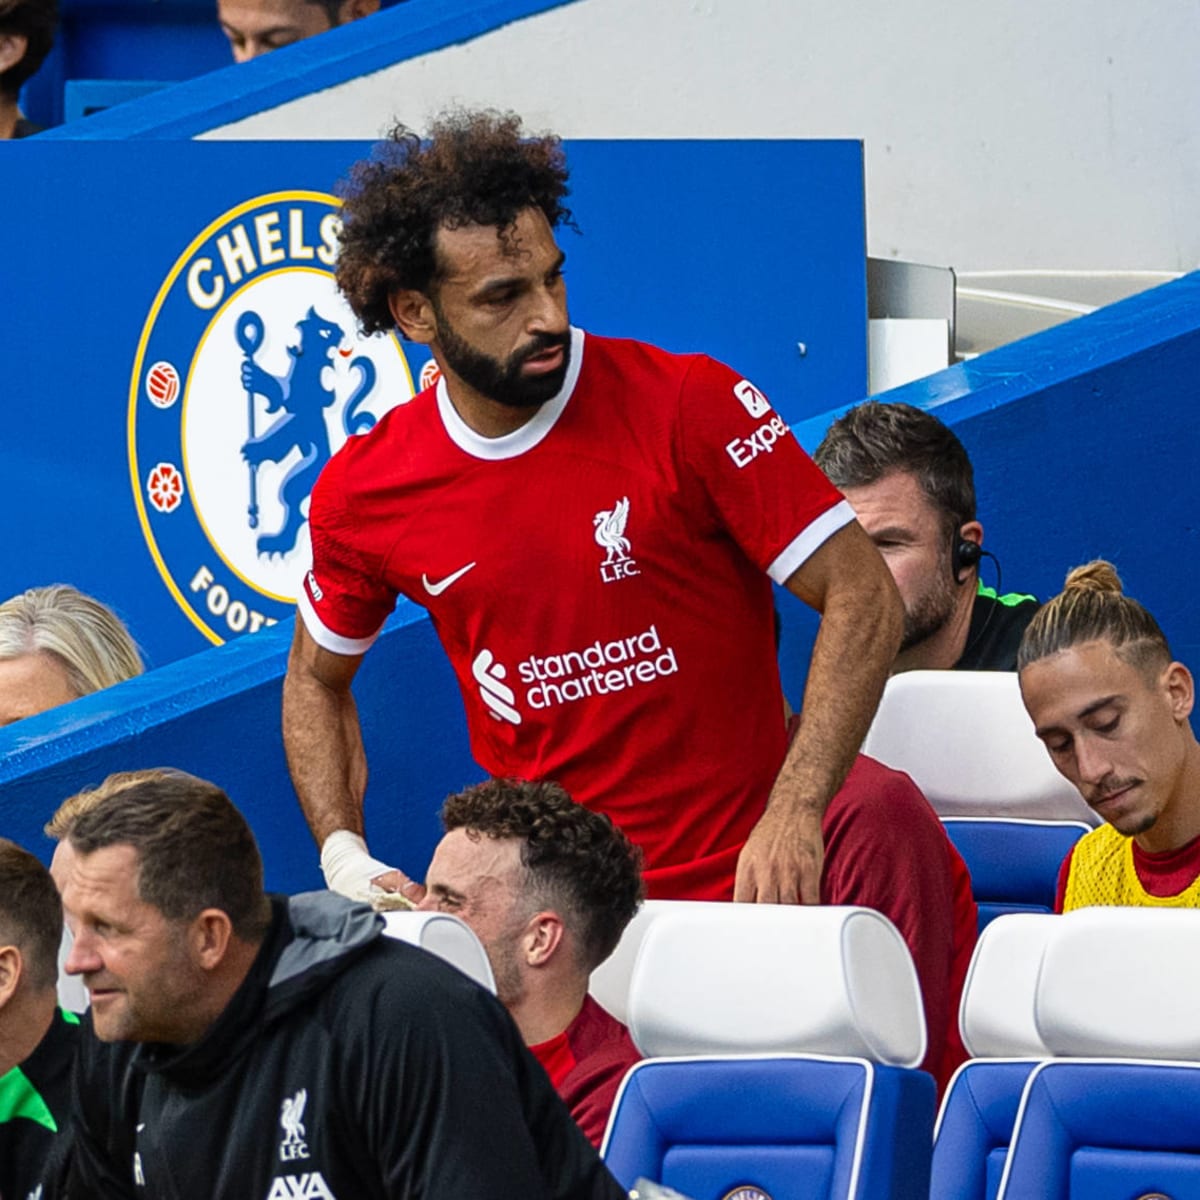 Why Salah won't leave Liverpool -- Carragher gives reasons